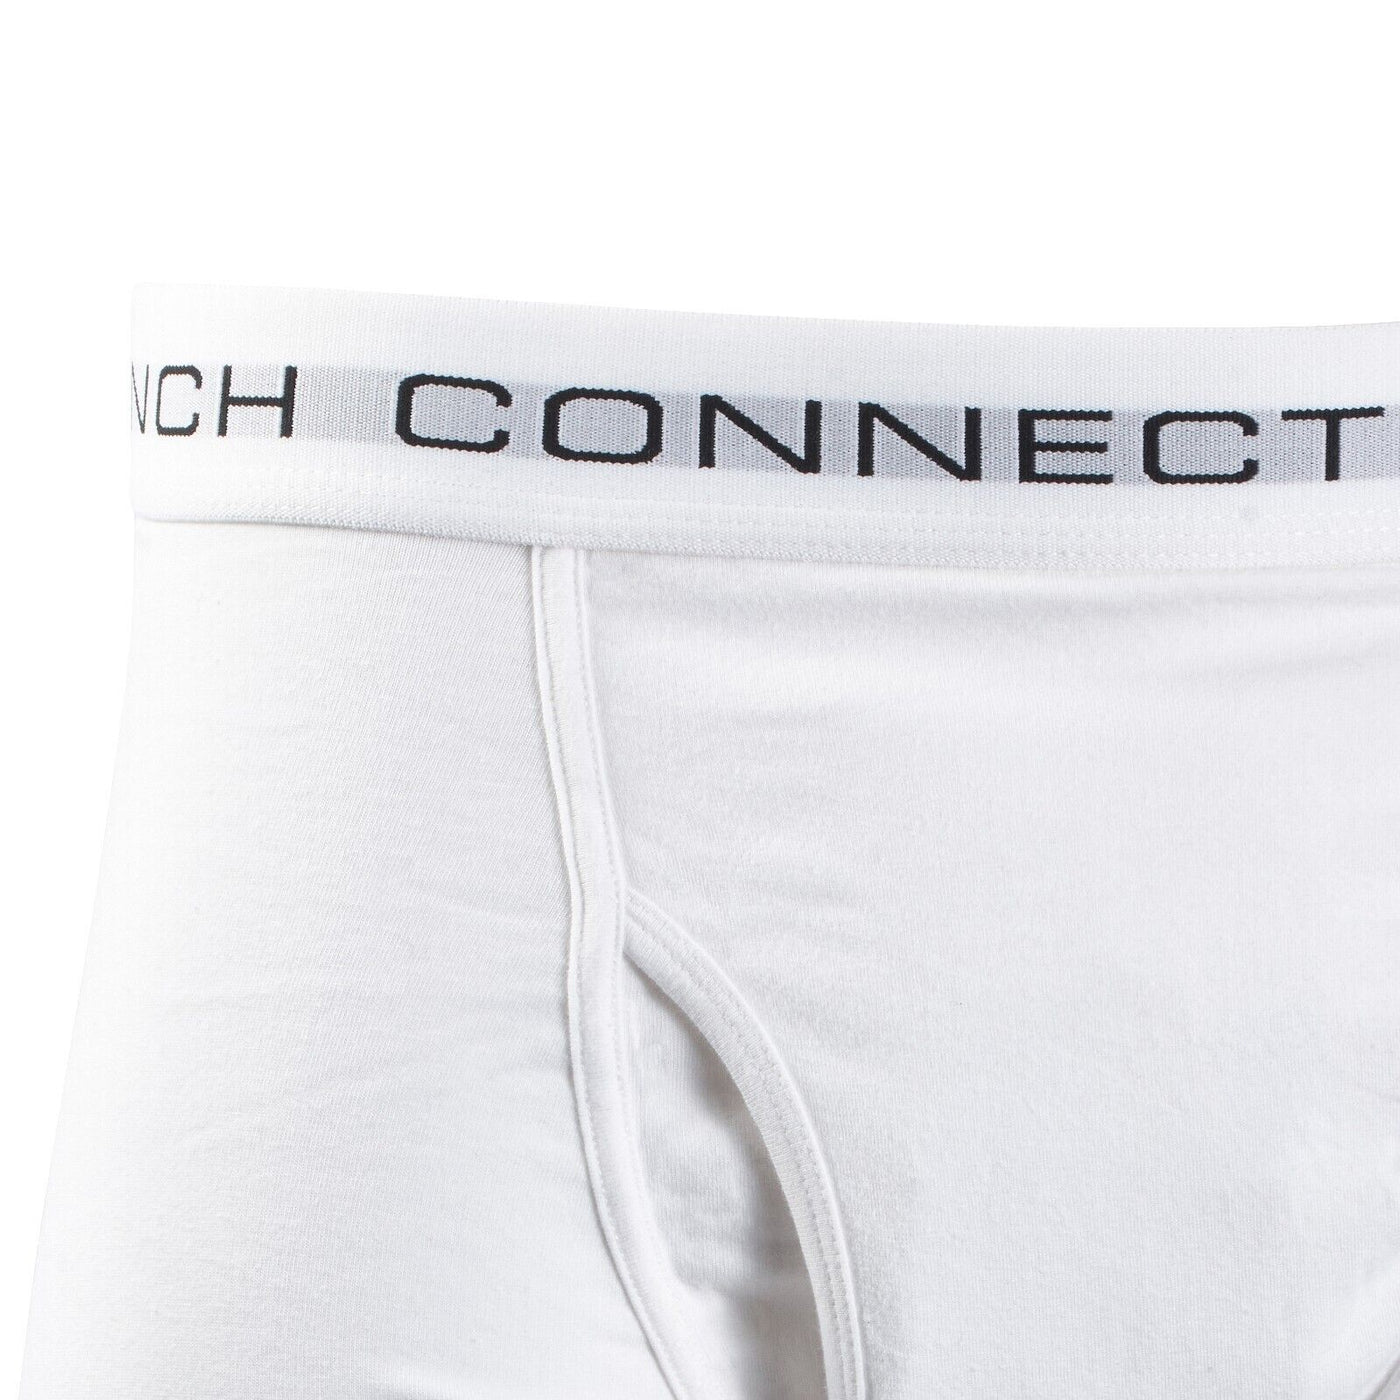 French Connection Men's White & HTH Grey 2 Pack Boxer Briefs